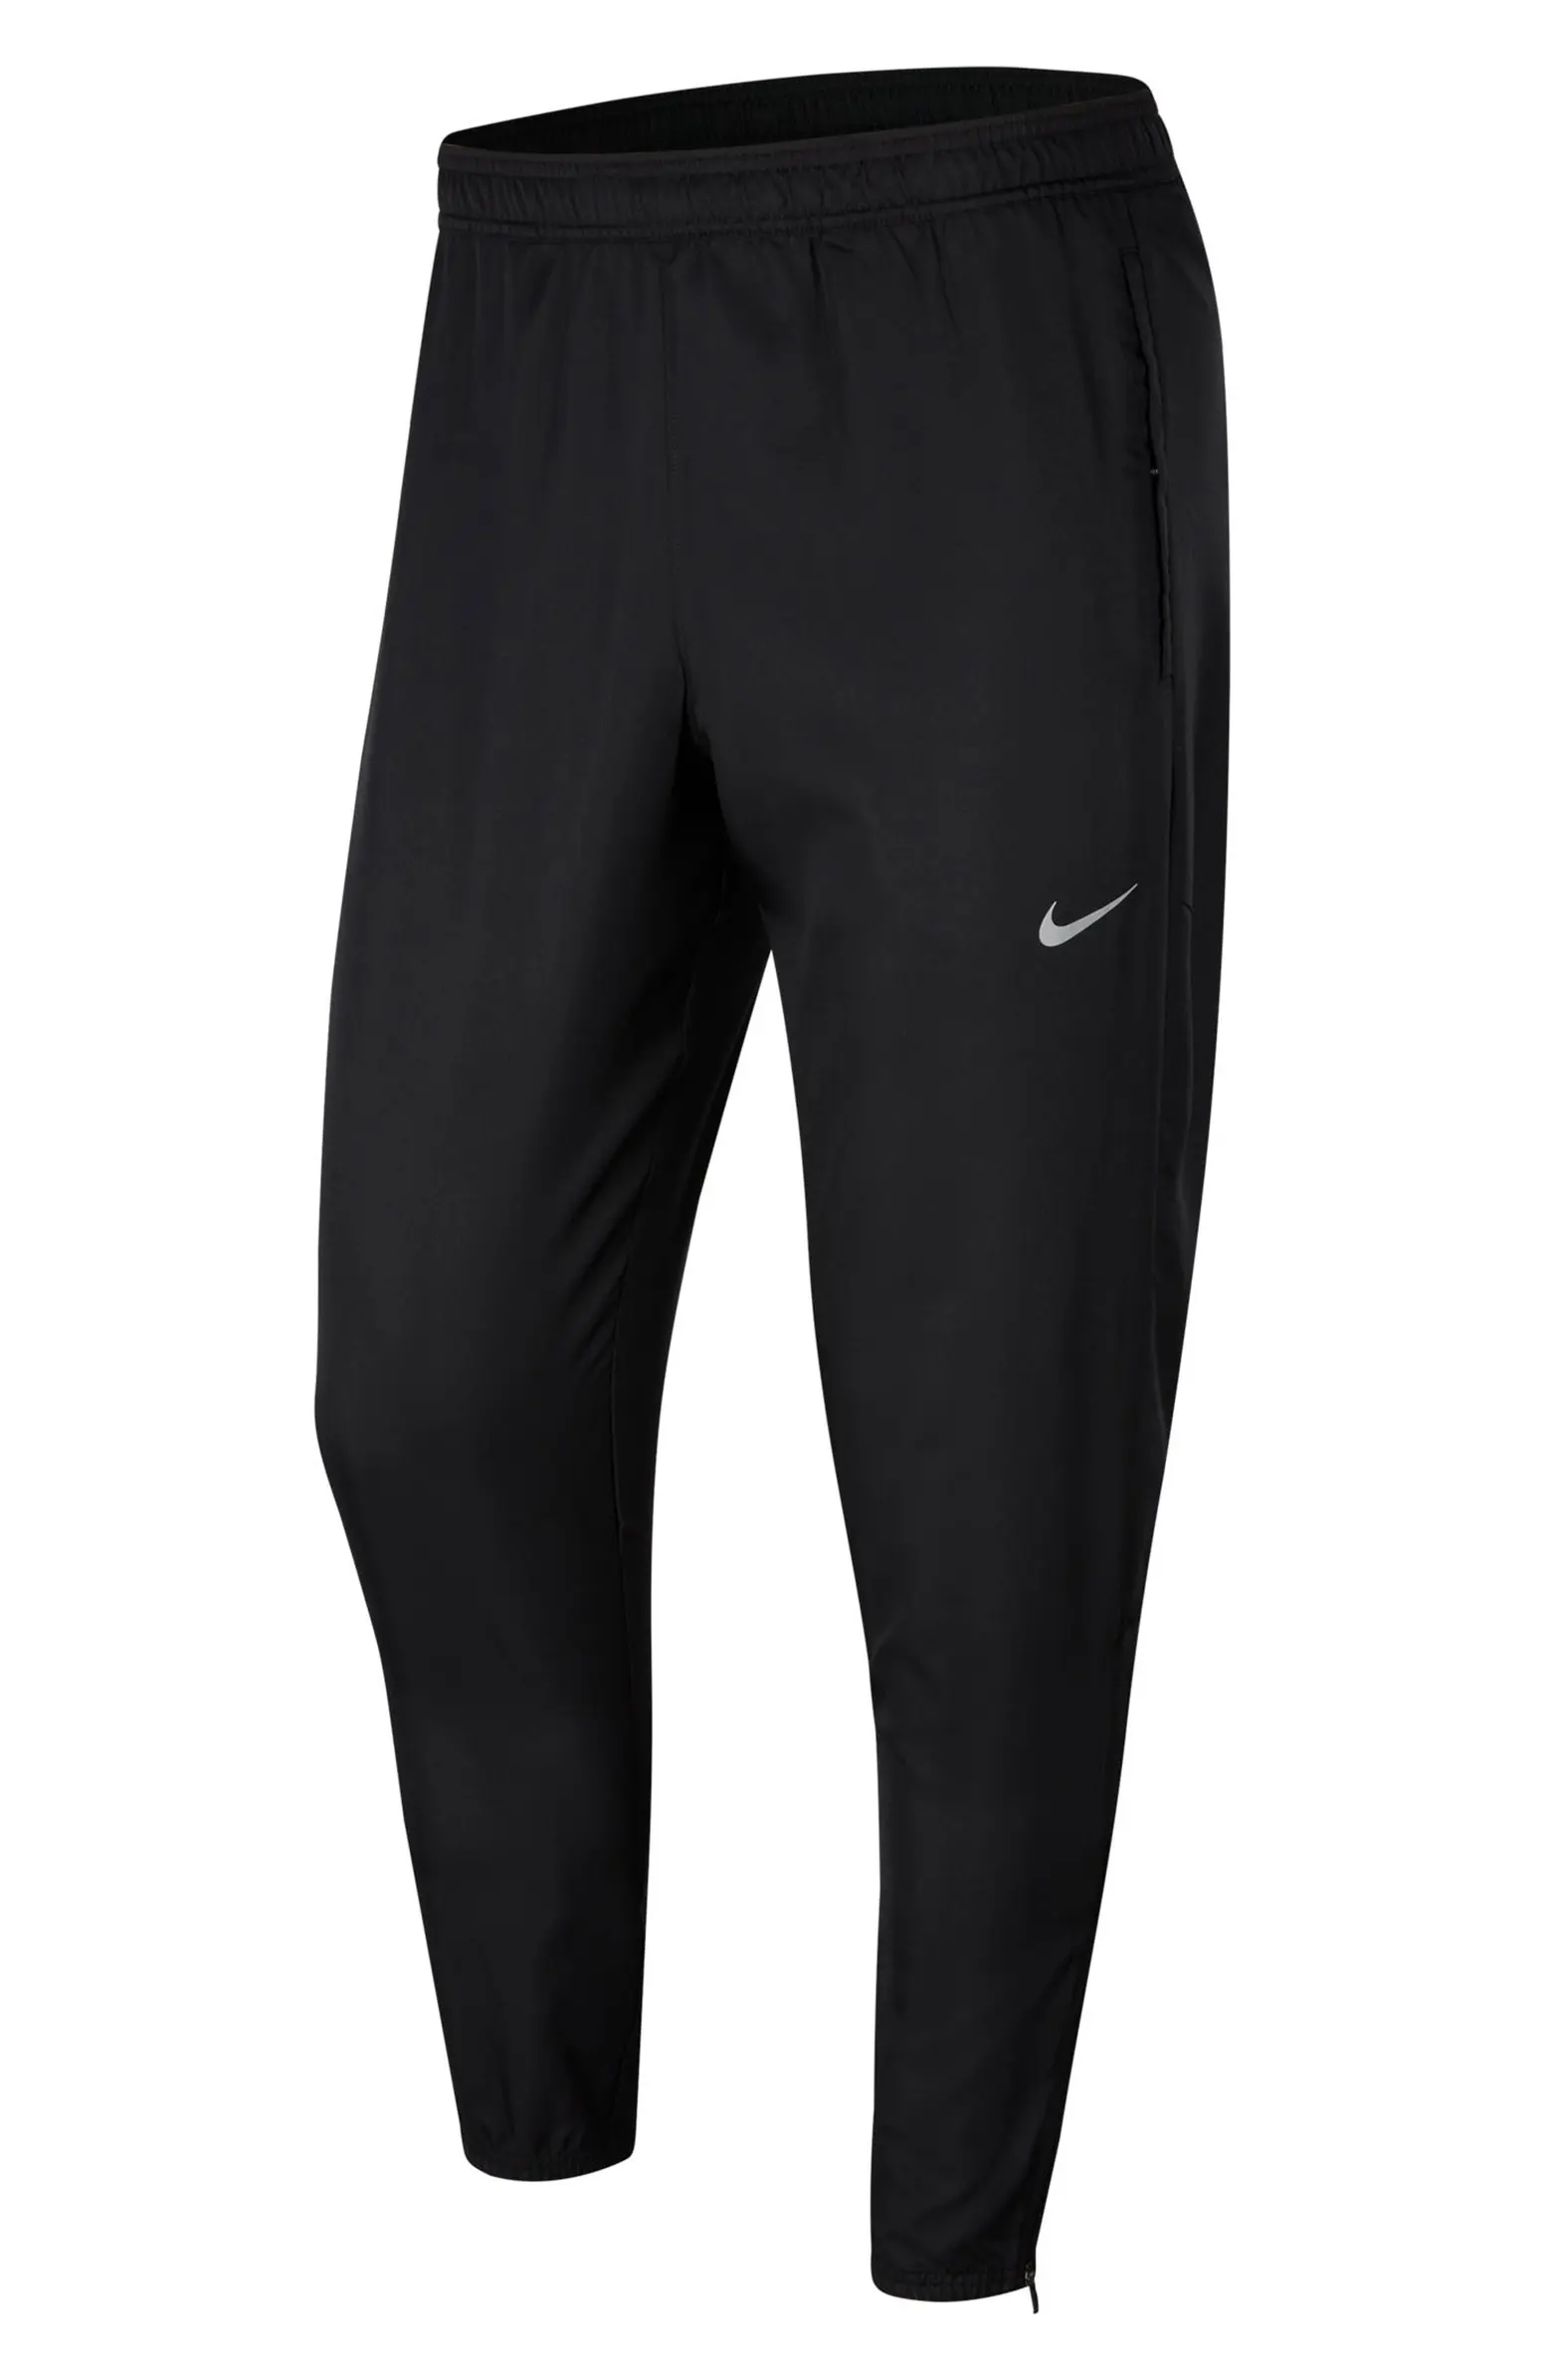 Over 30% OFF the Nike Dri-Fit Essential Woven Pants 